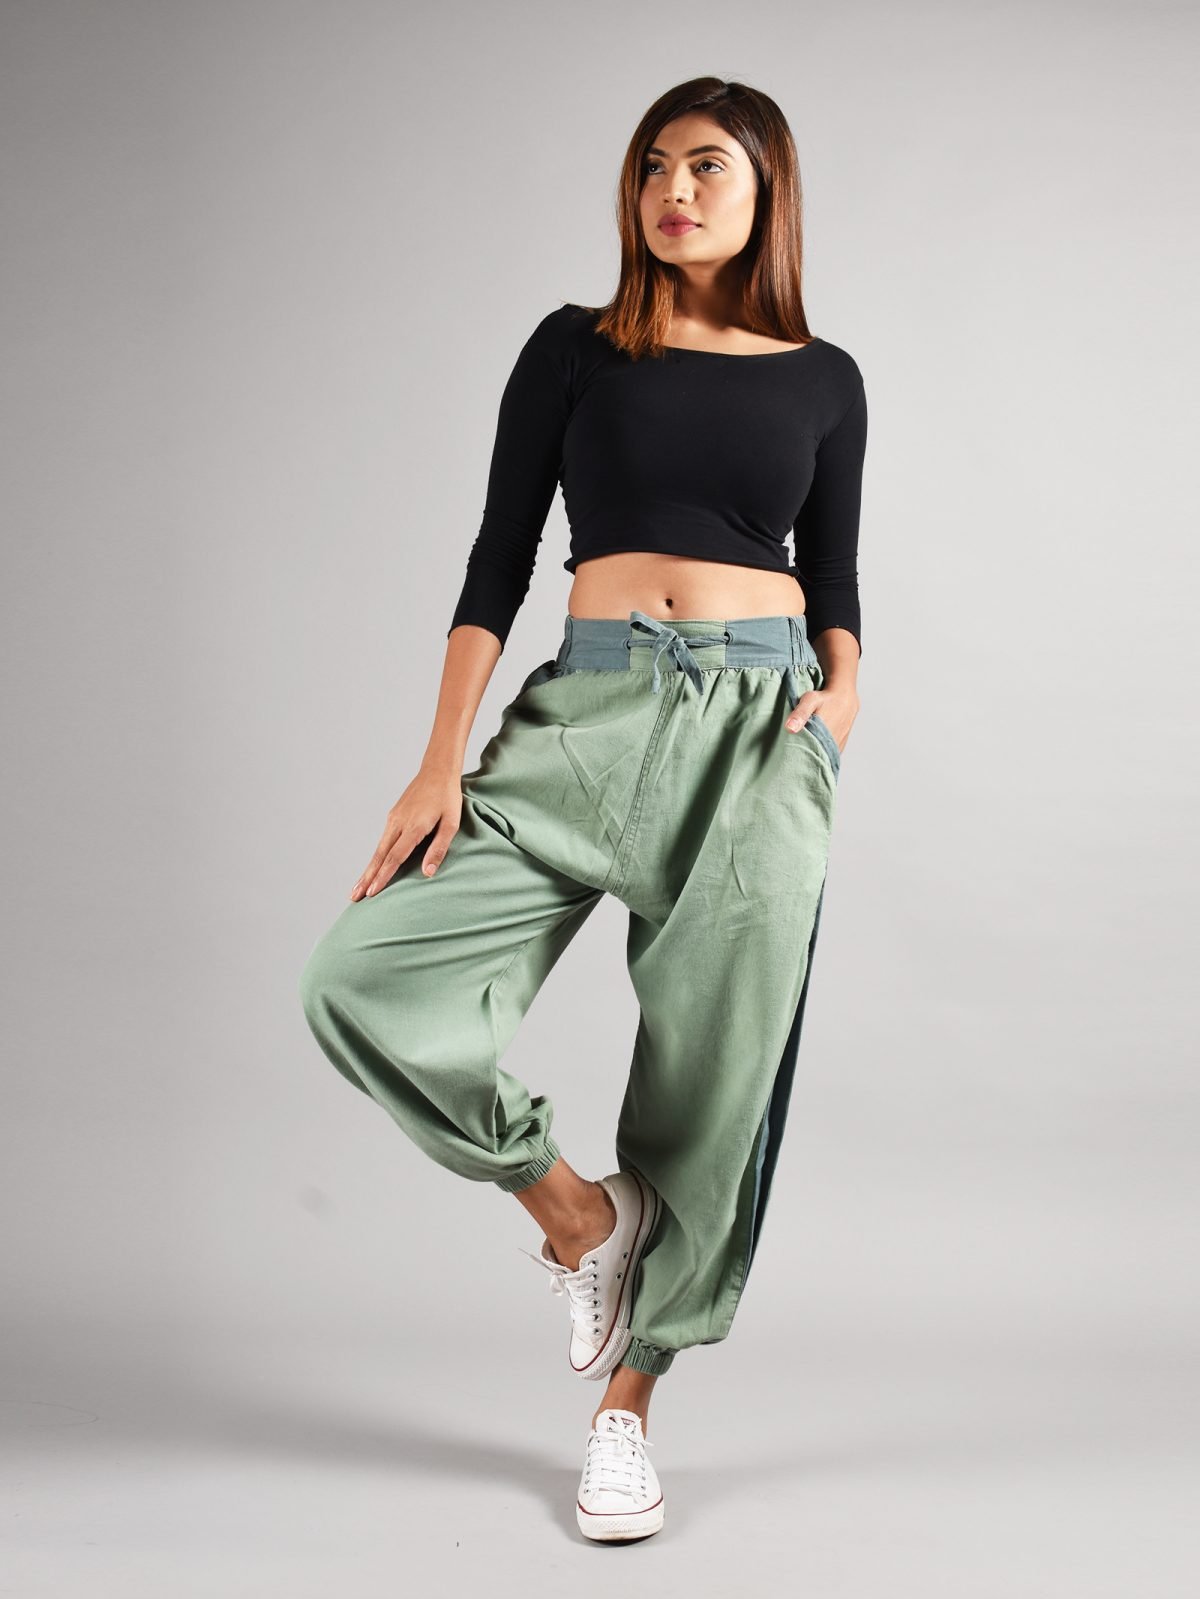 joggers for women  by Bombay Trooper